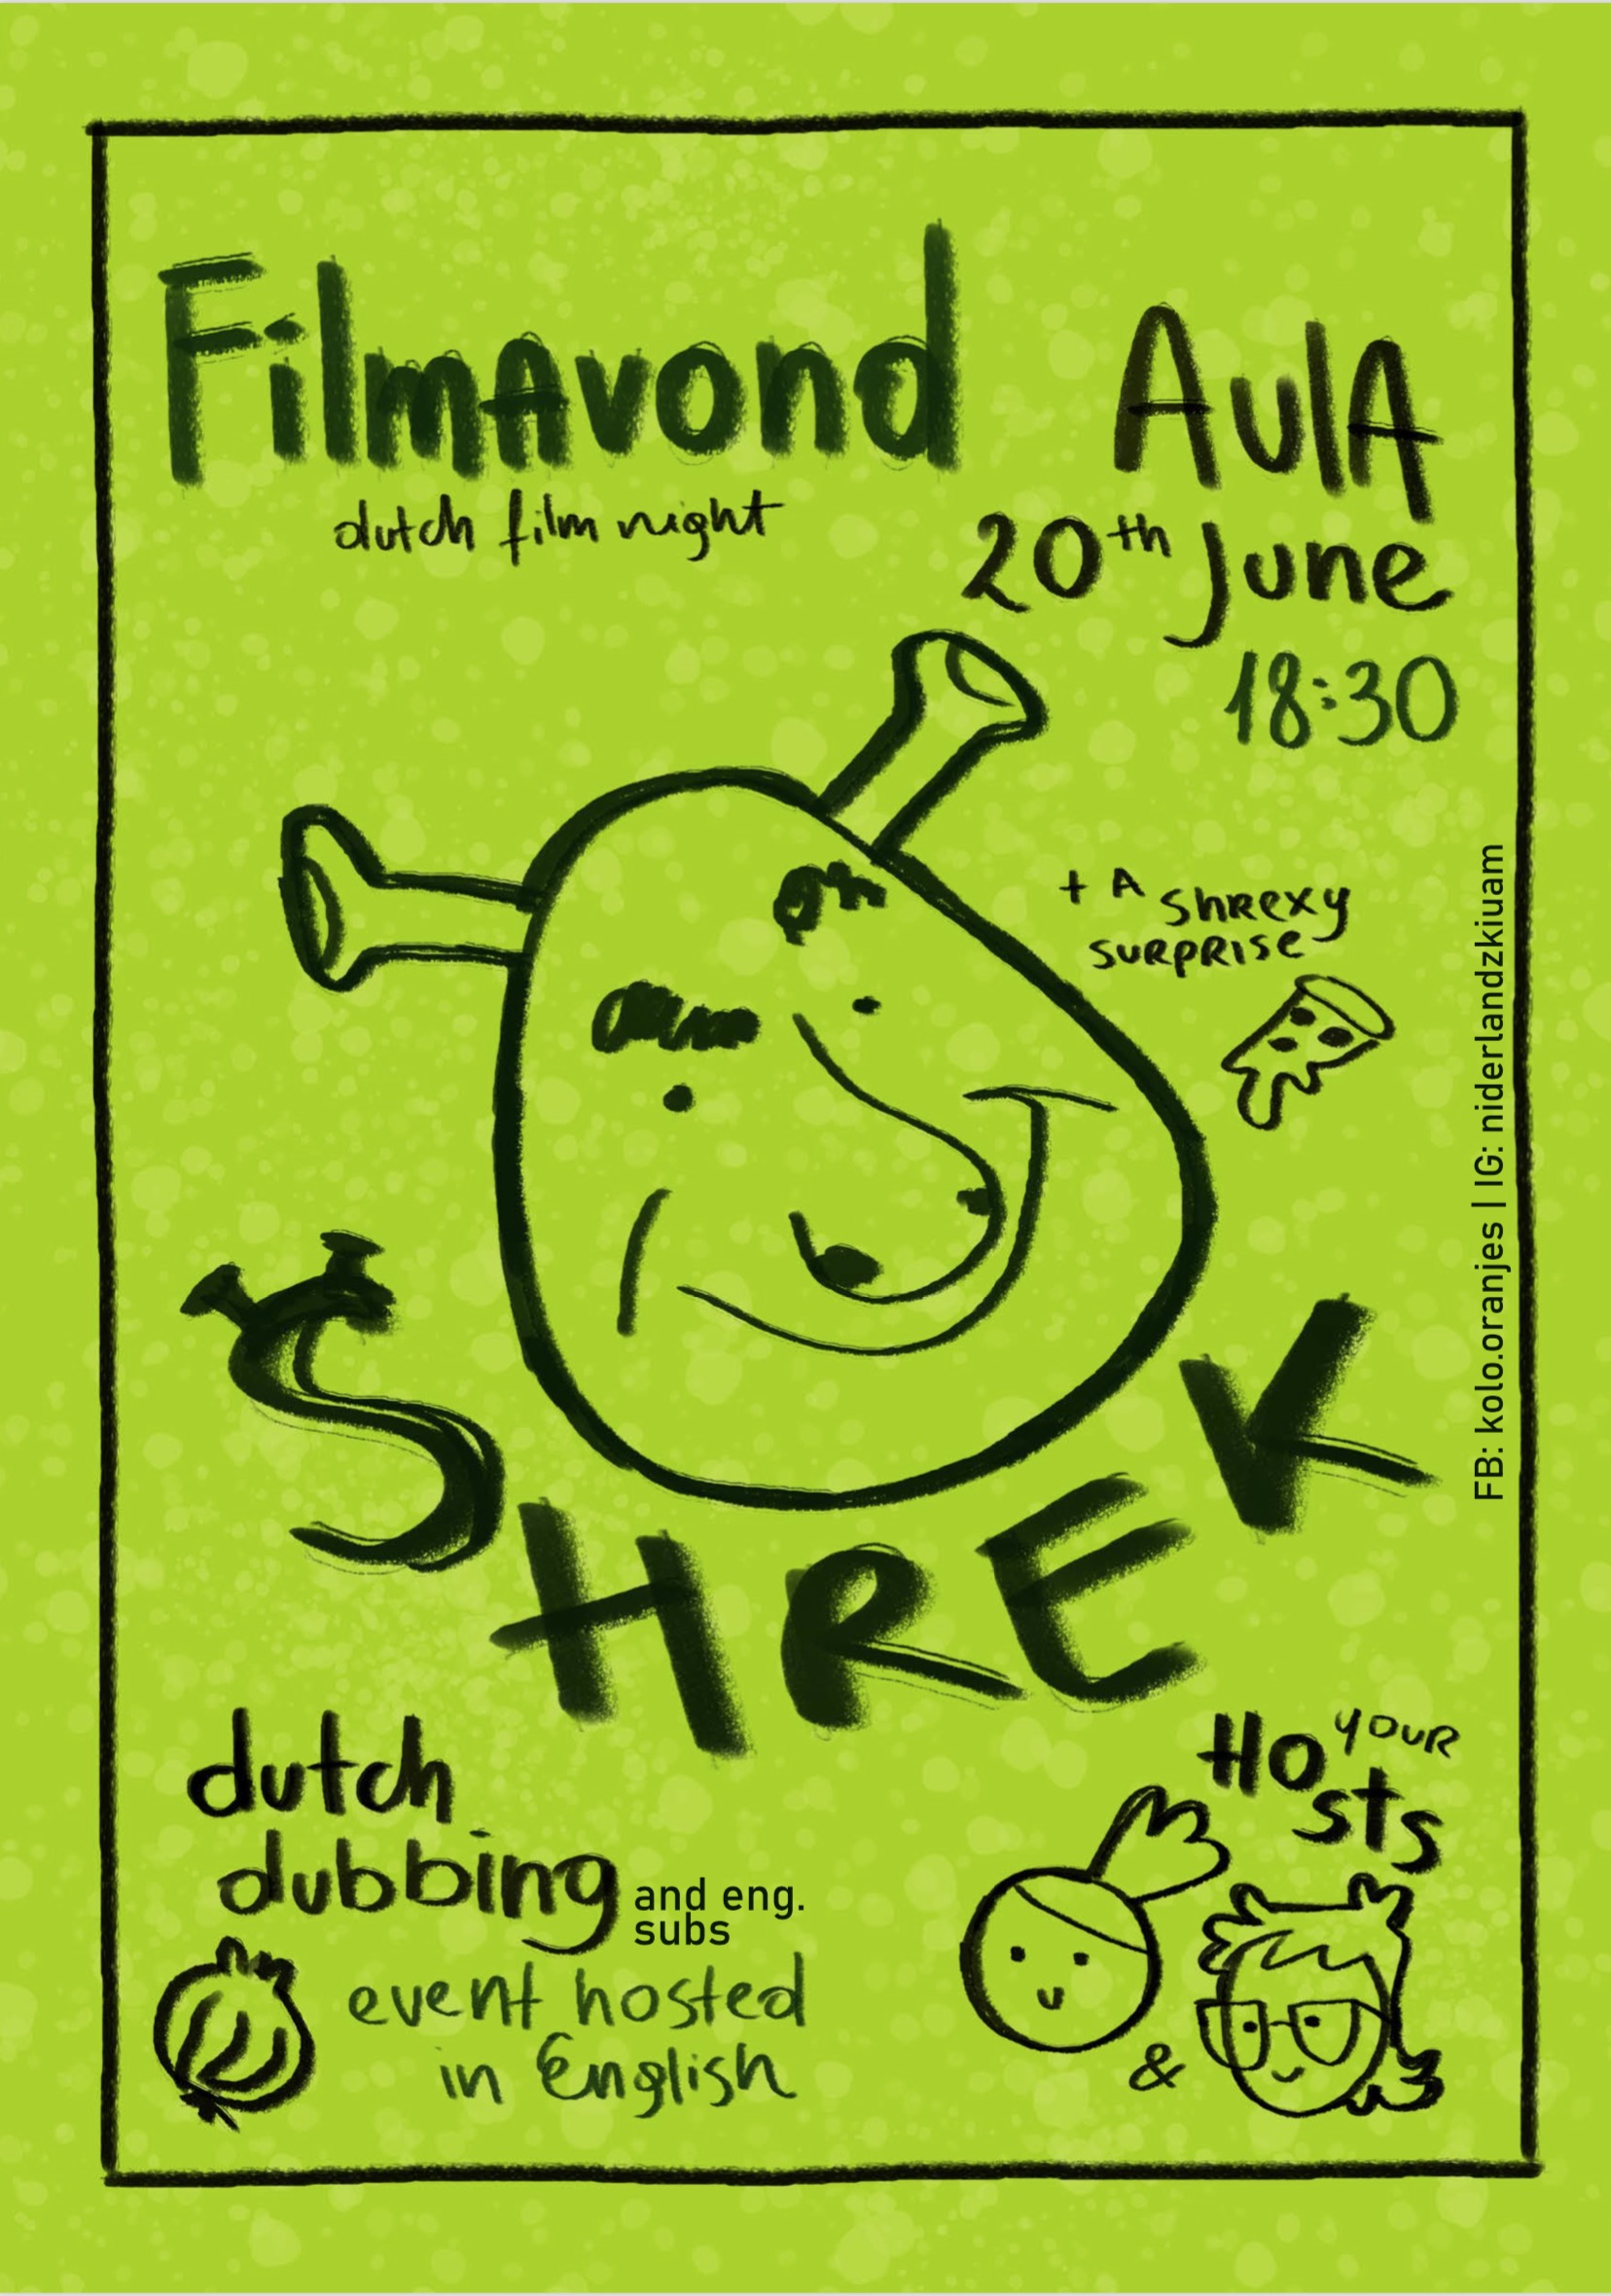 promotional poster: image of the character Shrek and text detailing the event